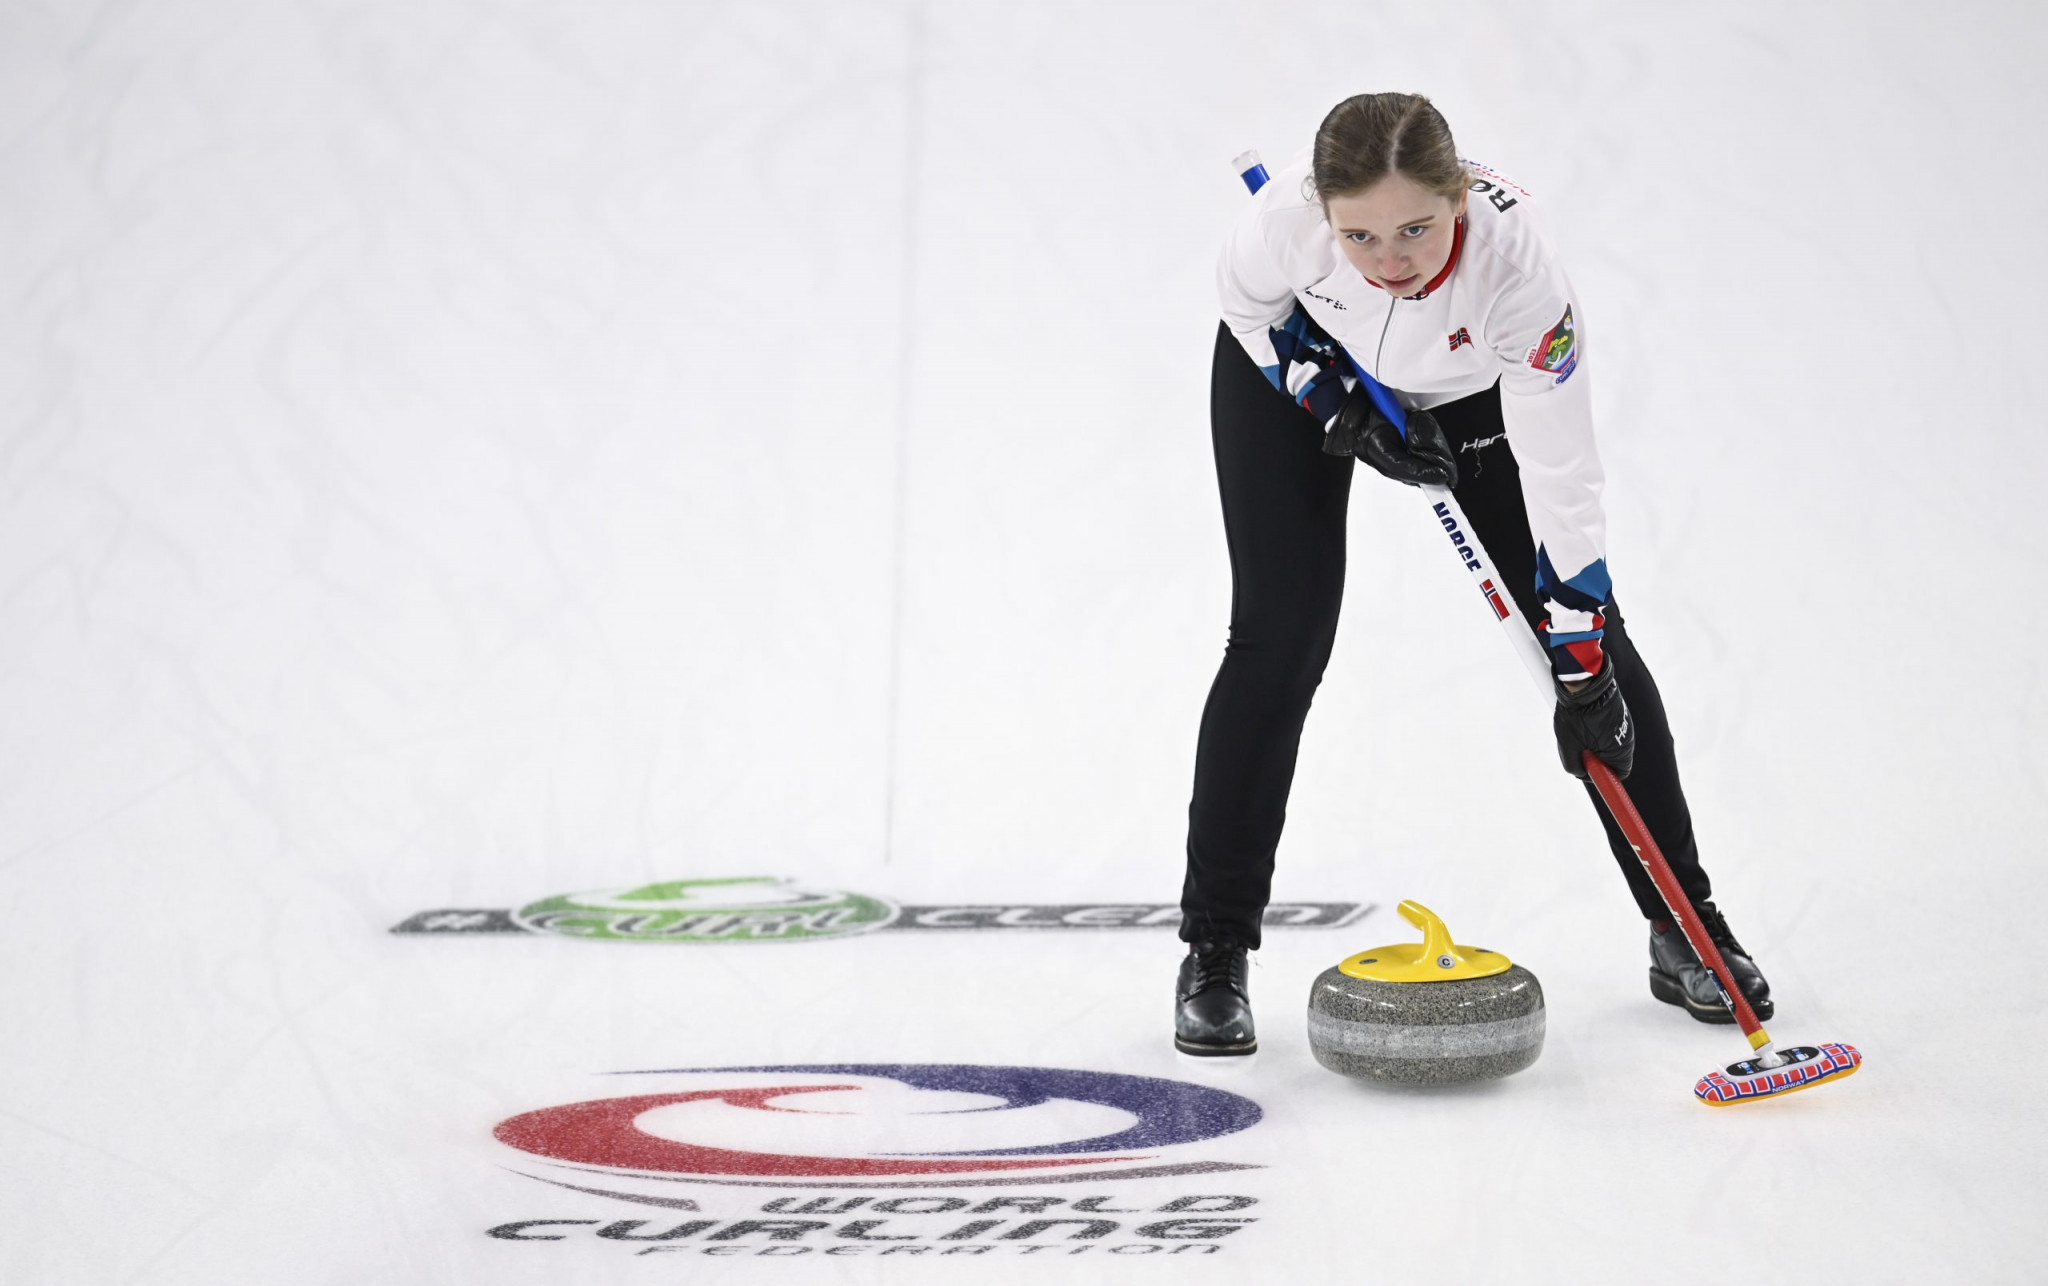 Martine Rønning helped Norway to its fourth win in the World Mixed Doubles Curling Championship ©World Curling